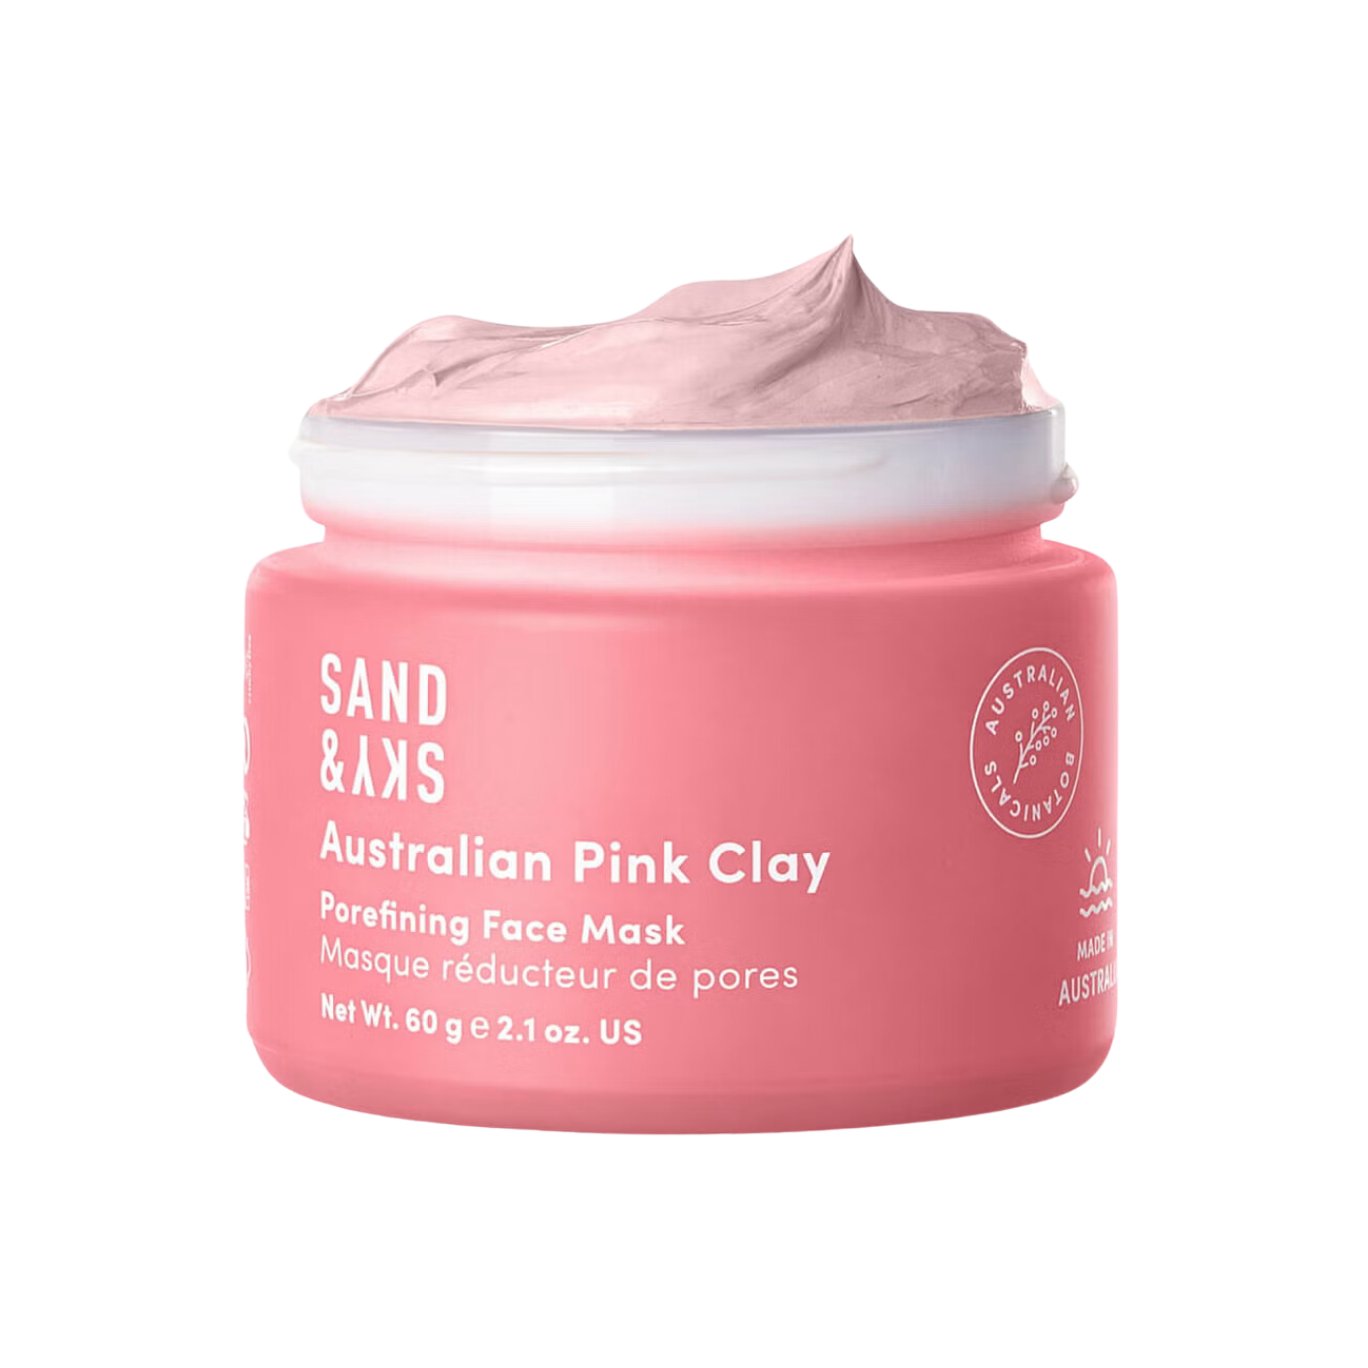 Sand & Sky Purifying Pink Clay Mask